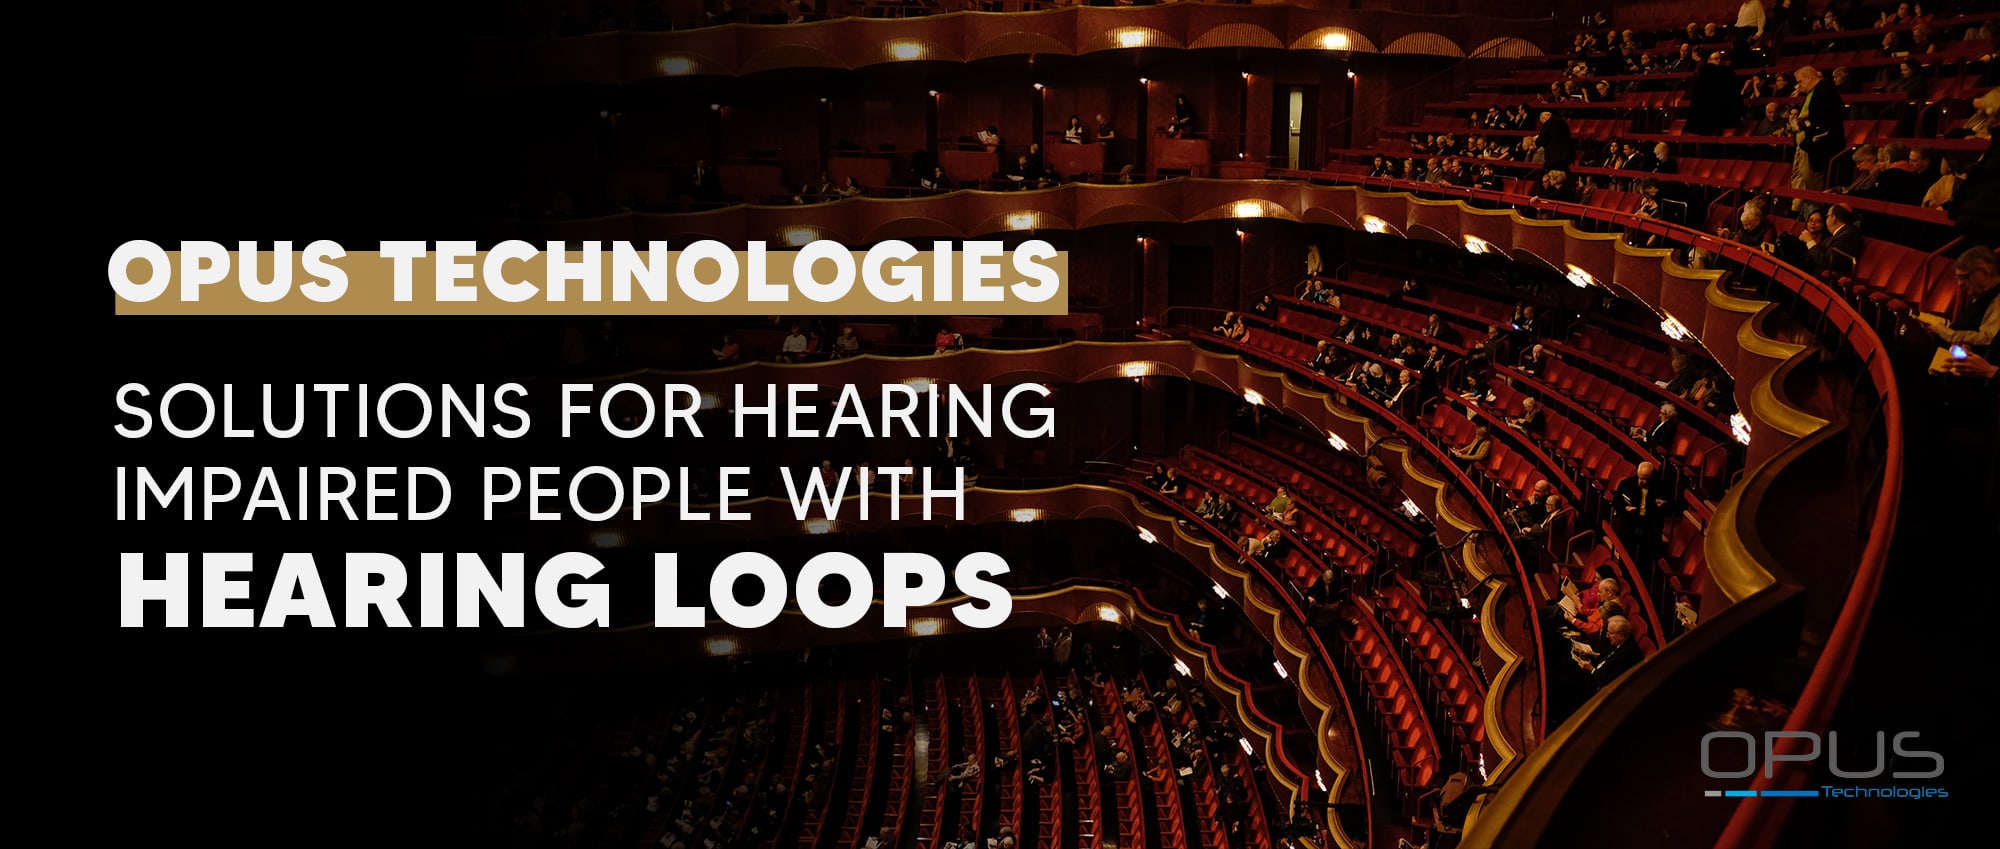 Opus Technologies - Solutions For Hearing Impaired People With Hearing Loops